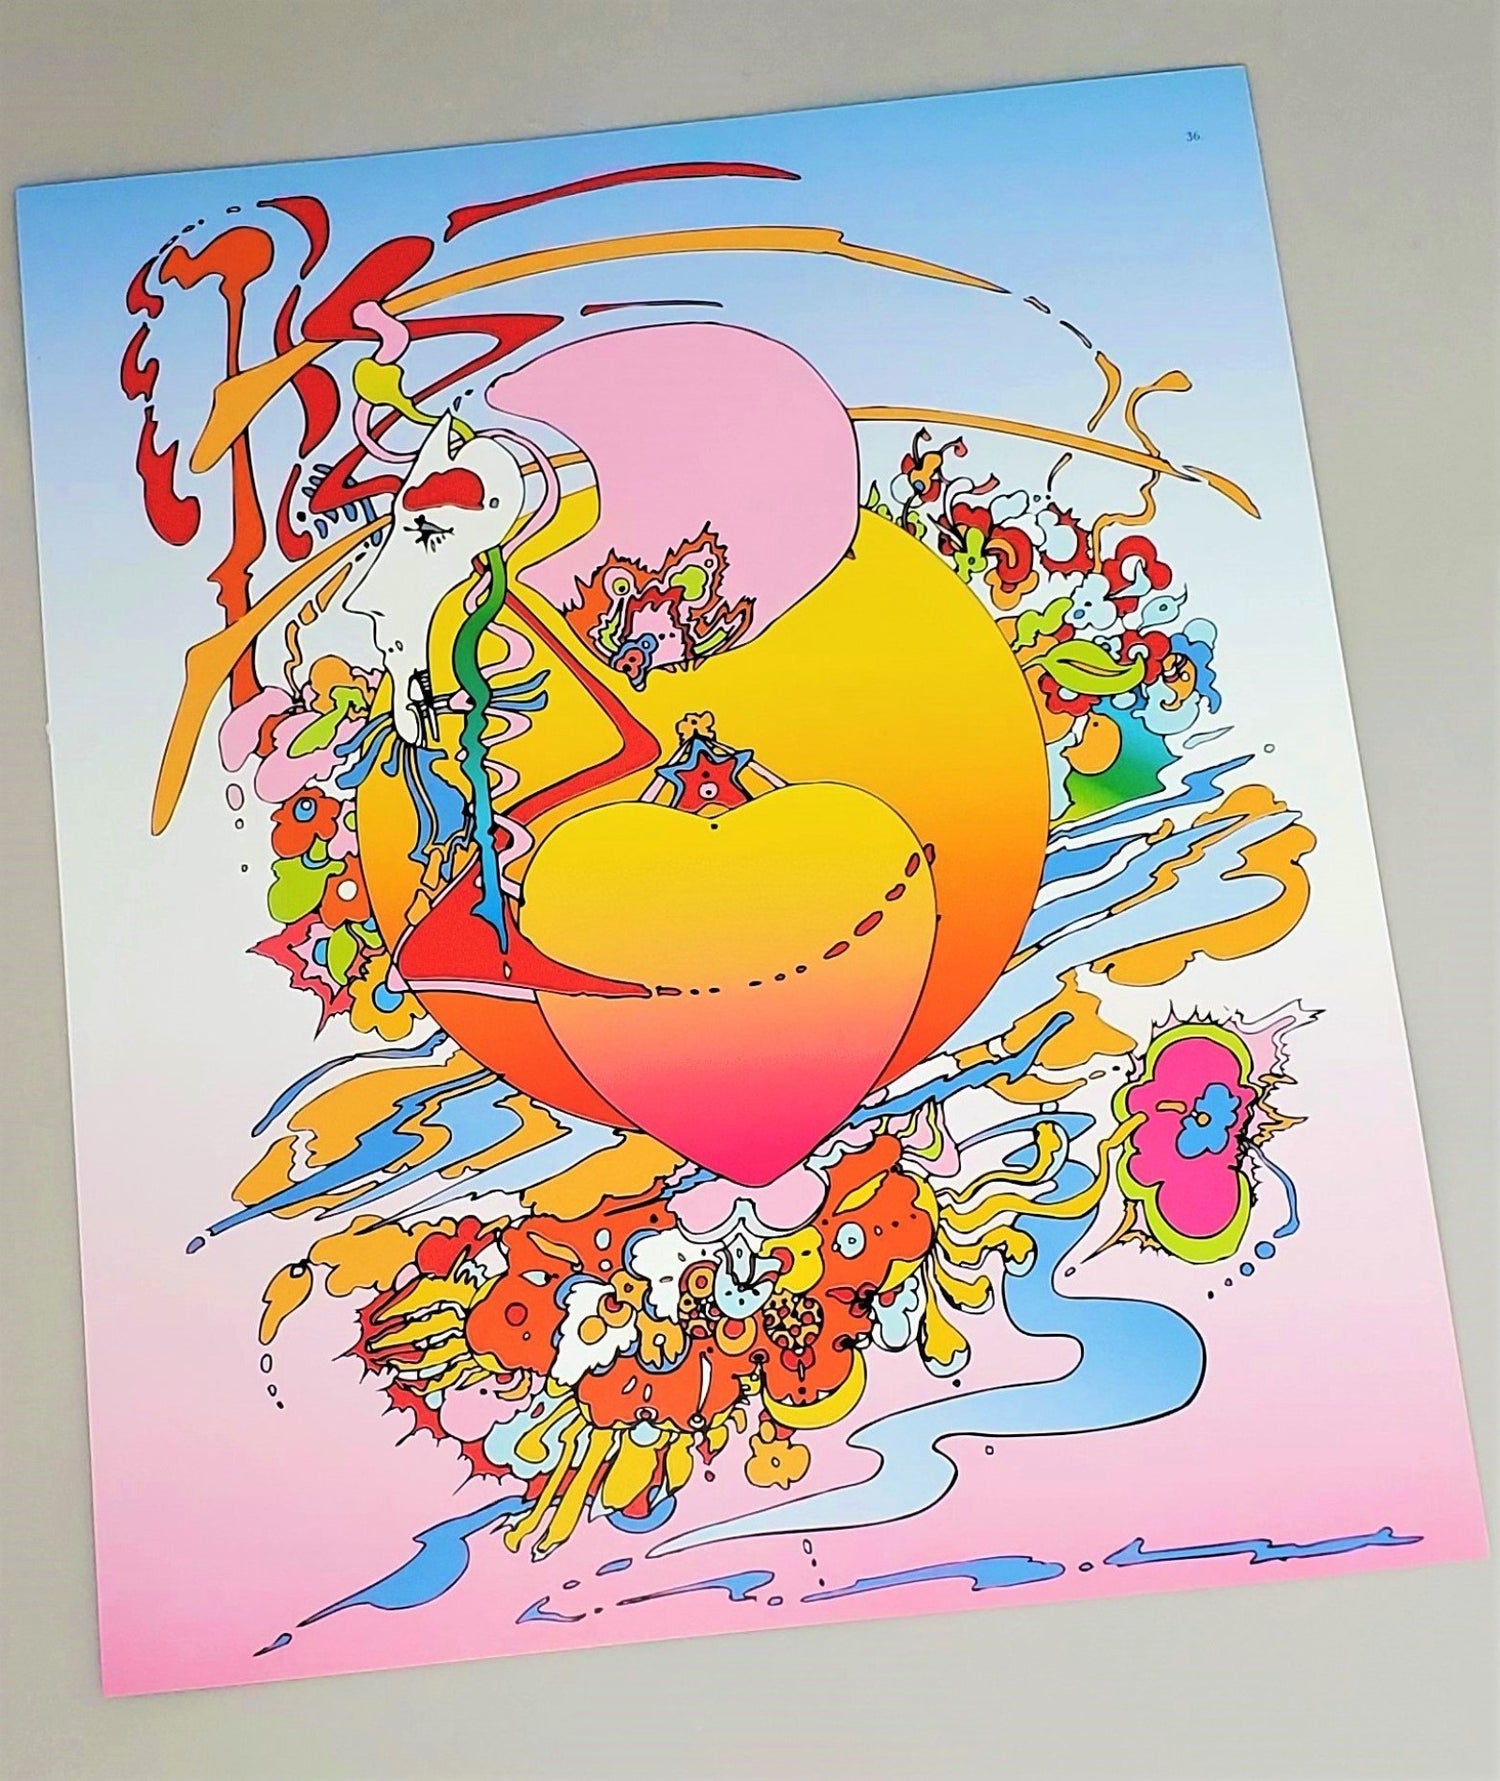 Orange Heart featured in The Art Of Peter Max 2002 edition hardcover book